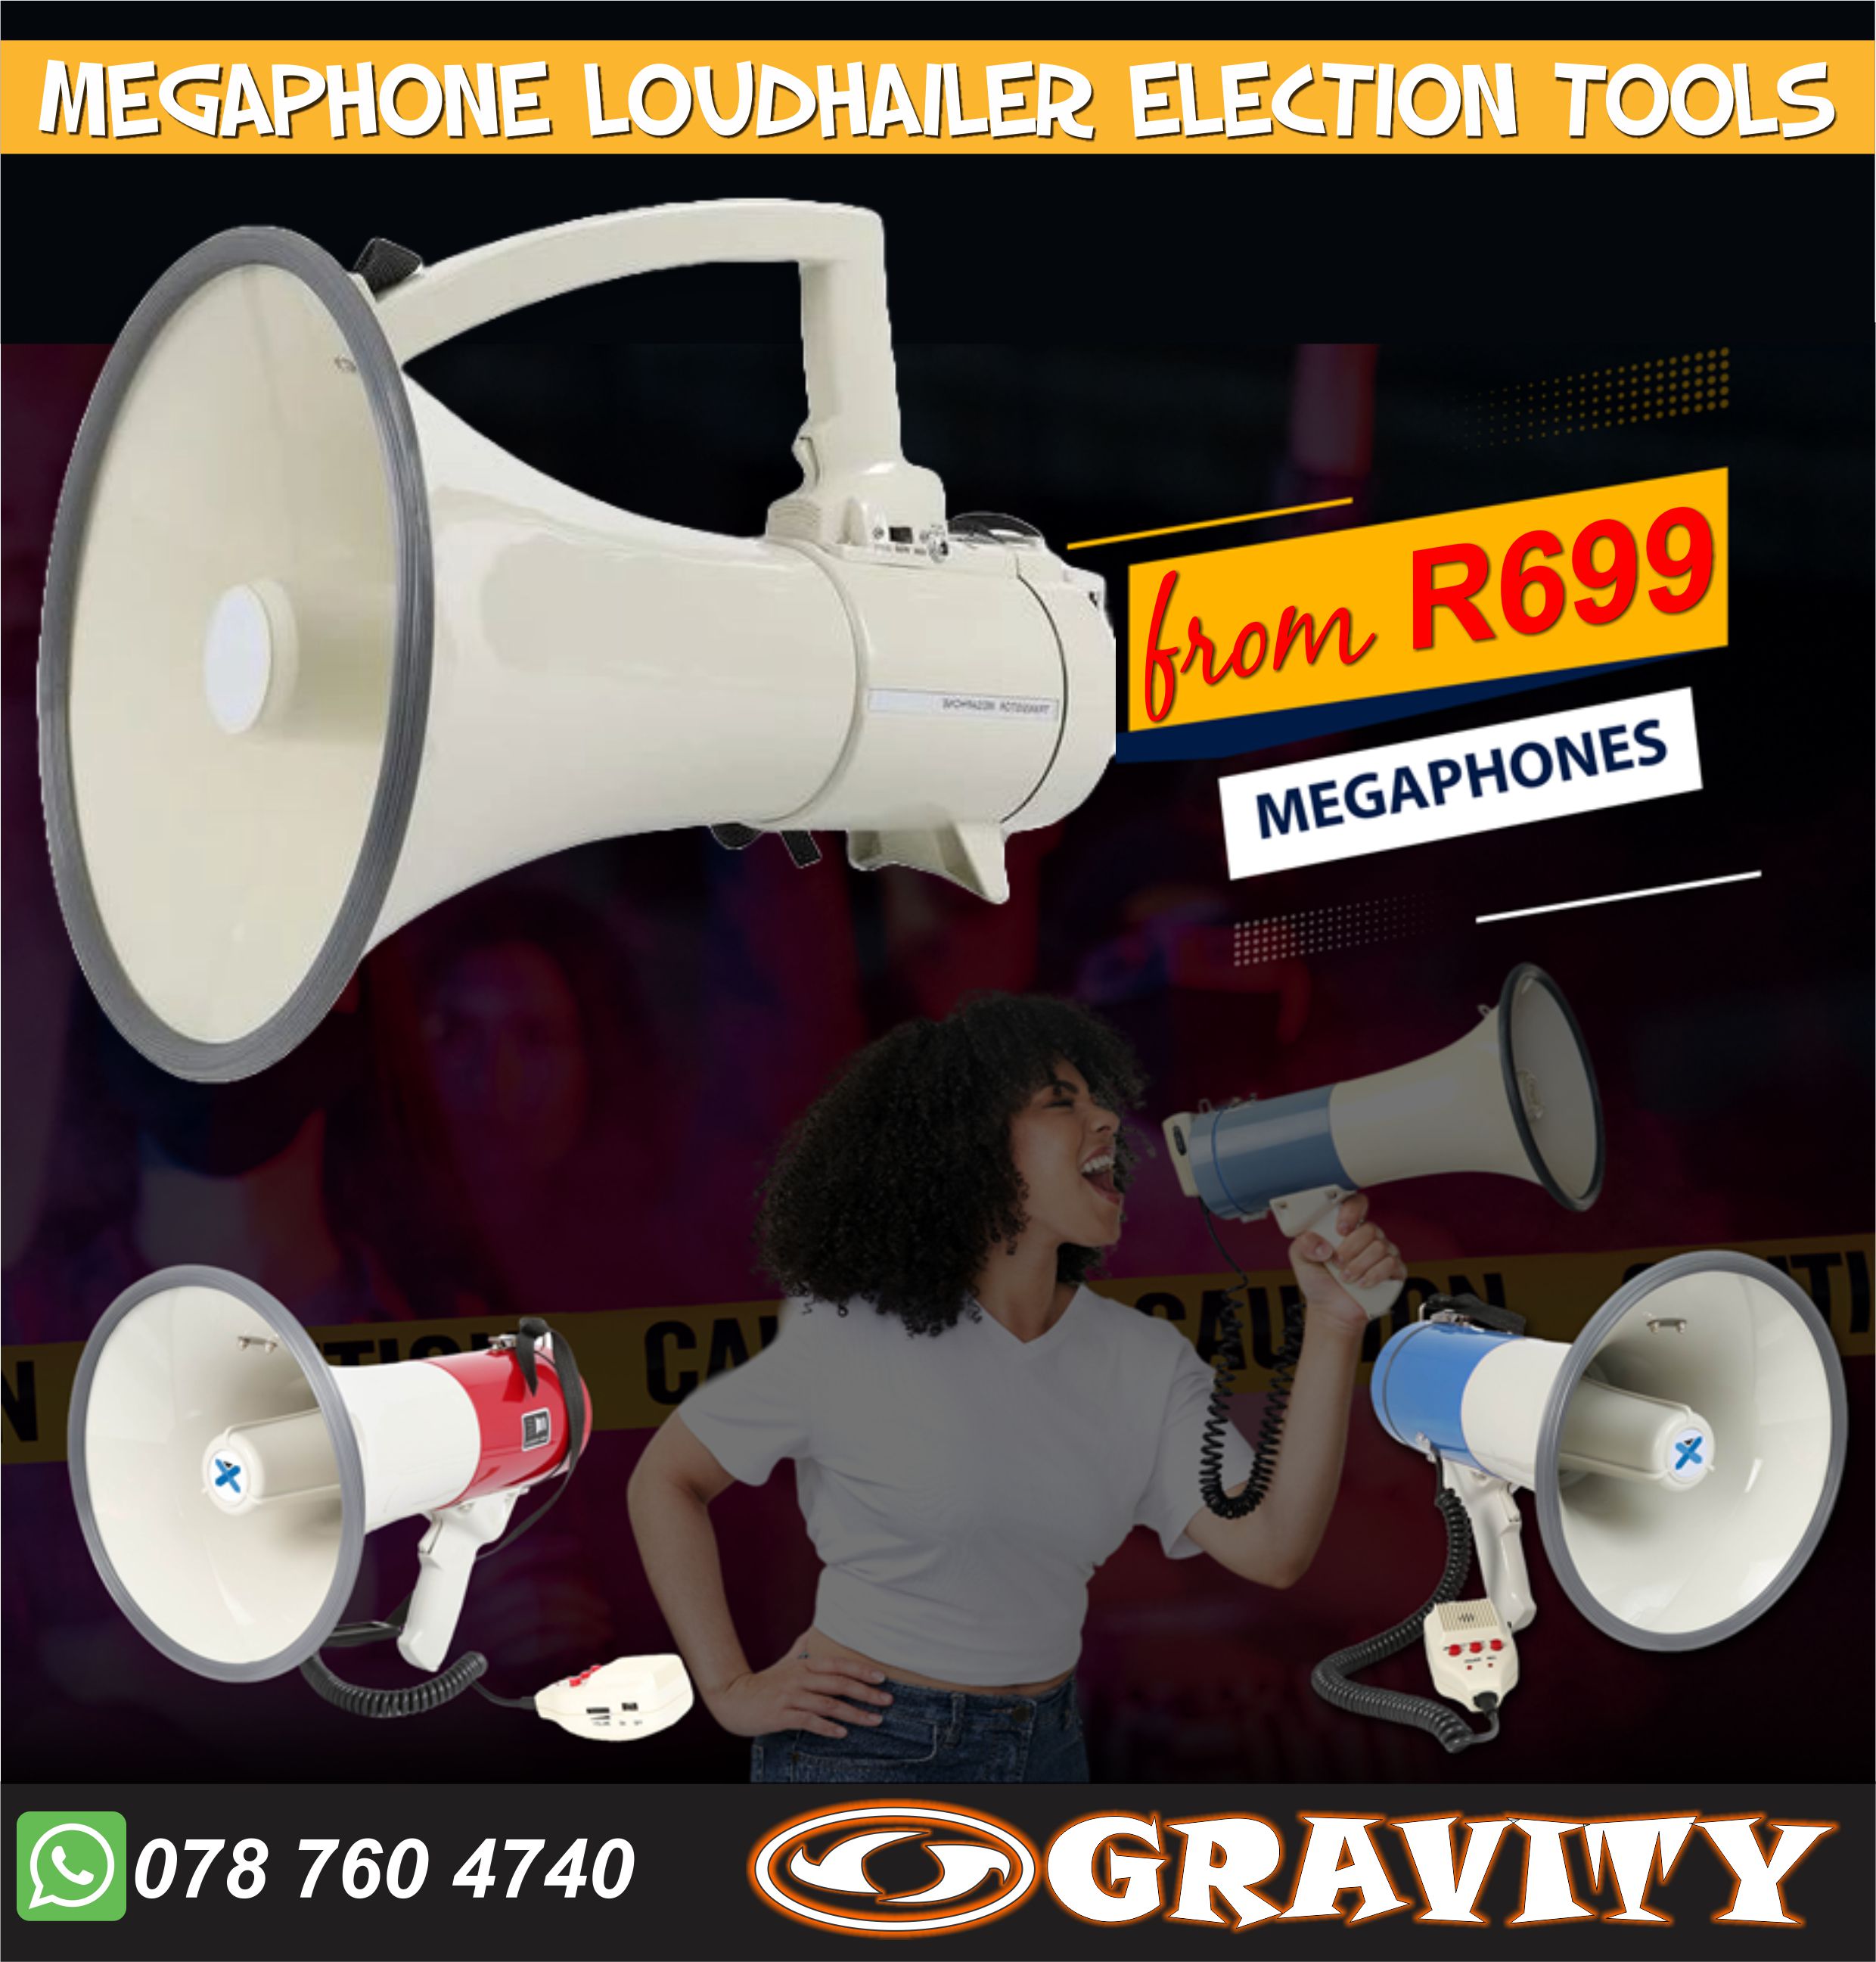 durban gravity Megaphone Loudhailer Mic Speaker PUBLIC ADDRESS BROADCASTING SYSTEMS DURBAN elections megaphone loudhailer | deal megphones mic system for all your outdoor events like rallys, marches, political rallys and announcements Political Elections outdoor announcements available at gravity dj store 0315072736  0315072463  . Megaphone Loudspeaker ANC elections outdoor events announcements 0315072463  DA political elections megaphone mic speaker needed at gravity dj store 0315072463  -with handheld mic OR without  -battery operated  -12v car power compatible  -Different sizes available:    * 5w / 15w  25w / 40w  loudspeaker horn loud hailer megaphone...`CALL STORE FOR AVAILABILITY  -sling strap carry about loudspeaker   -portable loudspeaker megaphone  -outdoor handheld mobile loudspeaker  Megaphones, loudhailers, and pa amplifiers used in public hearings, schools and elections a system of microphones, amplifiers, and loudspeakers used to amplify speech or music in a large building or at an outdoor gathering.This article is about audio systems. For public IP addresses, see IP address.Durable sound for events, evacuation, meetings and political rallies. Professional advice is free and is a phone call away Megaphone  From Wikipedia, the free encyclopedia This article is about the amplification device. For the chemical compound, see Megaphone (molecule). For other uses, see Megaphone (disambiguation). 